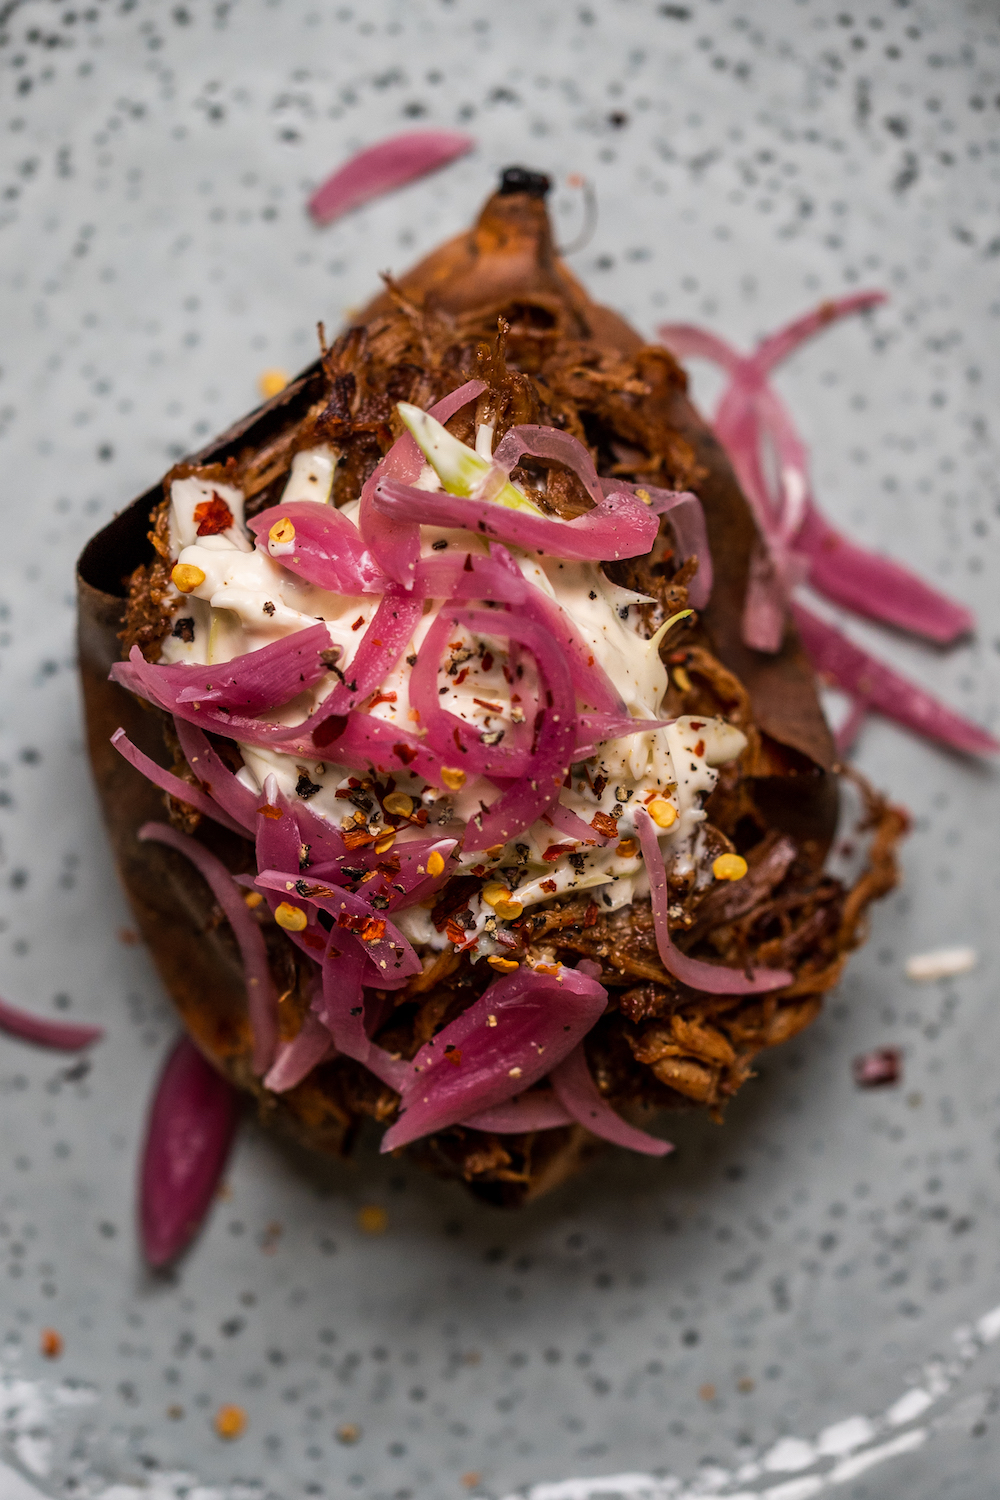 Smoky pulled pork baked sweet potato with crème fraîche and red picked onions on a blue plate